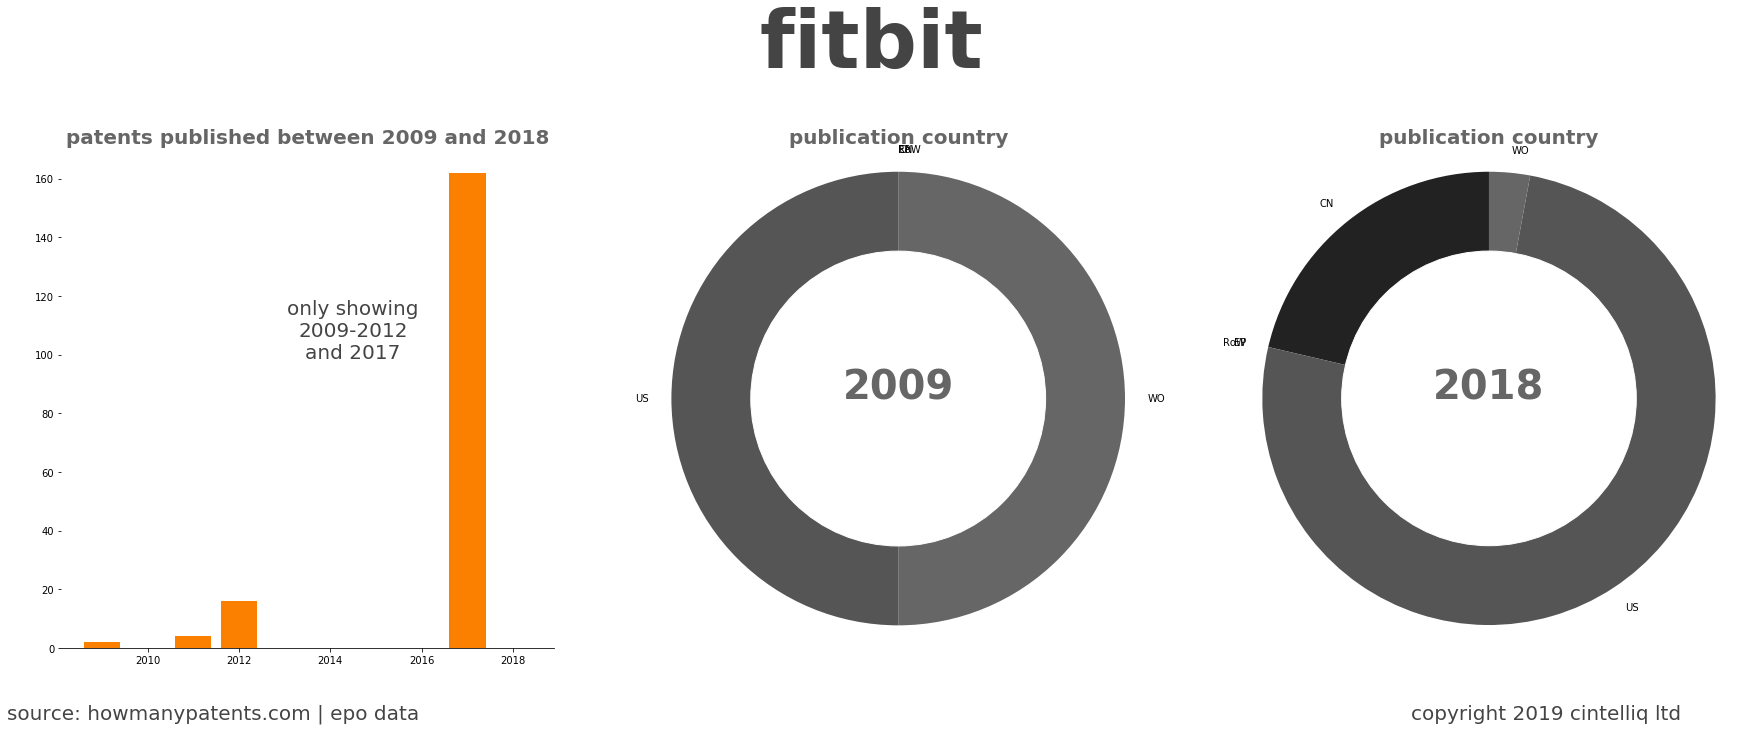 summary of patents for Fitbit